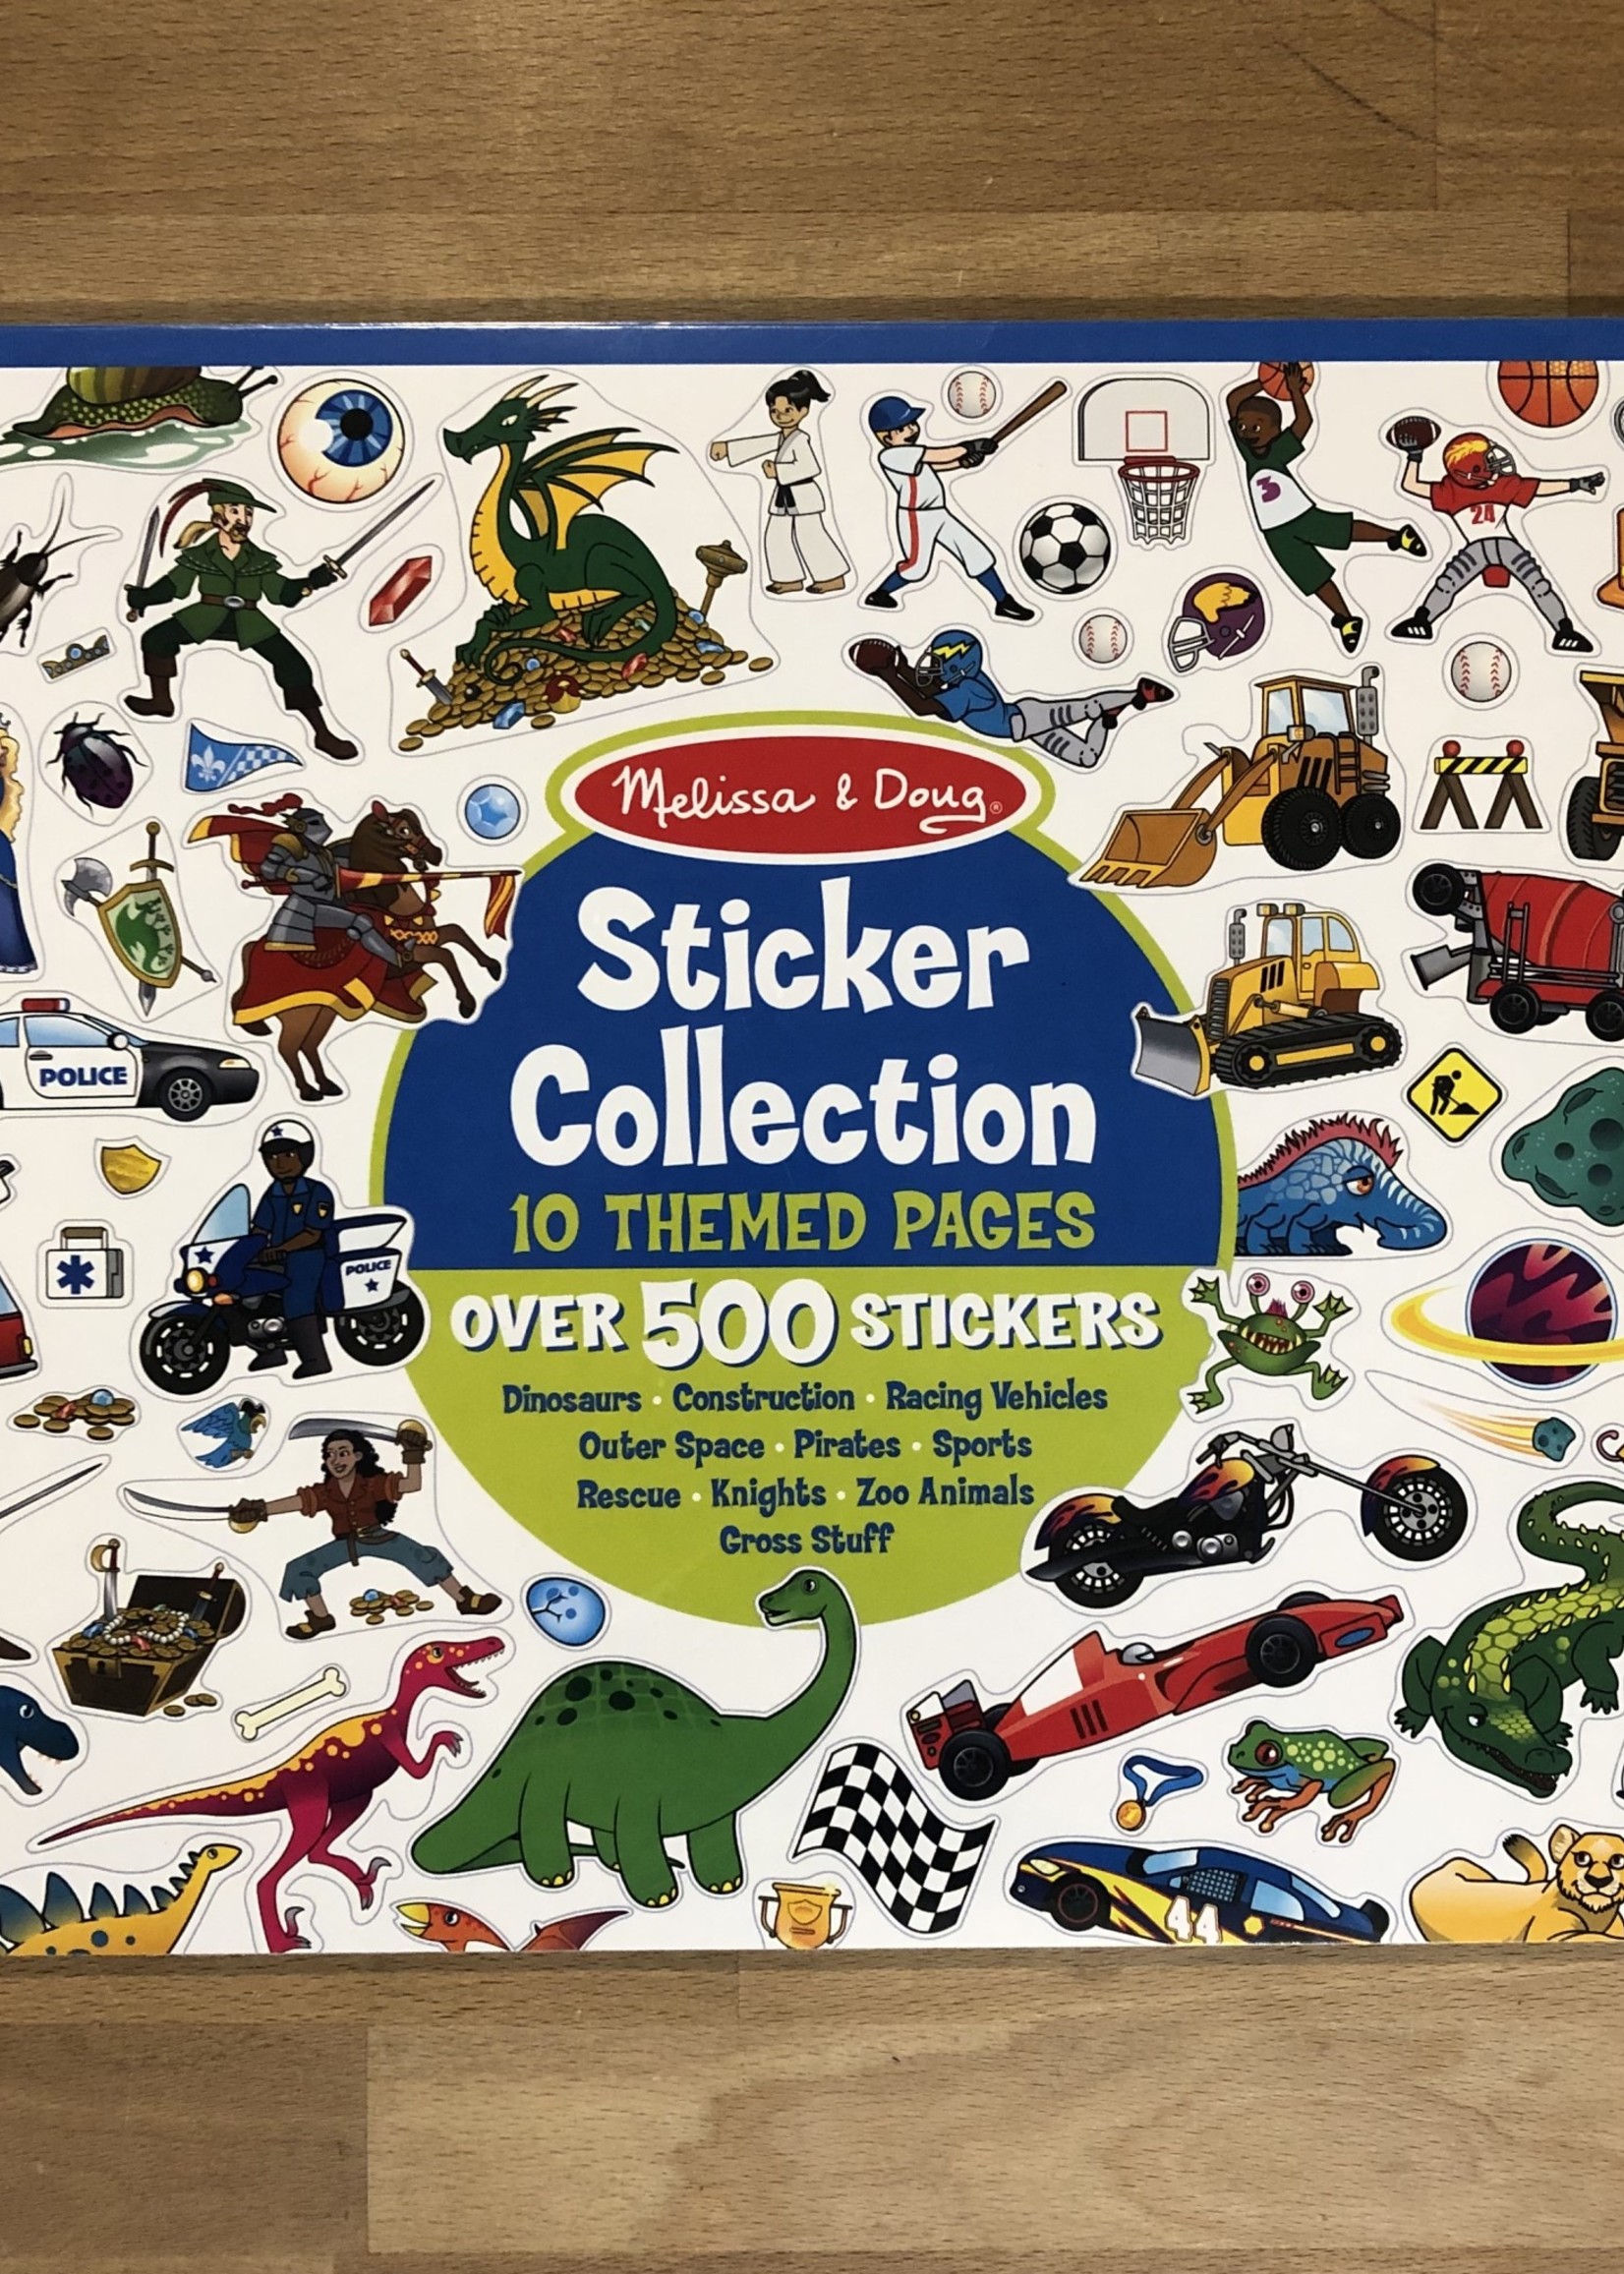 Melissa & Doug Sticker Collection - Dinosaurs, Vehicles, Space & More